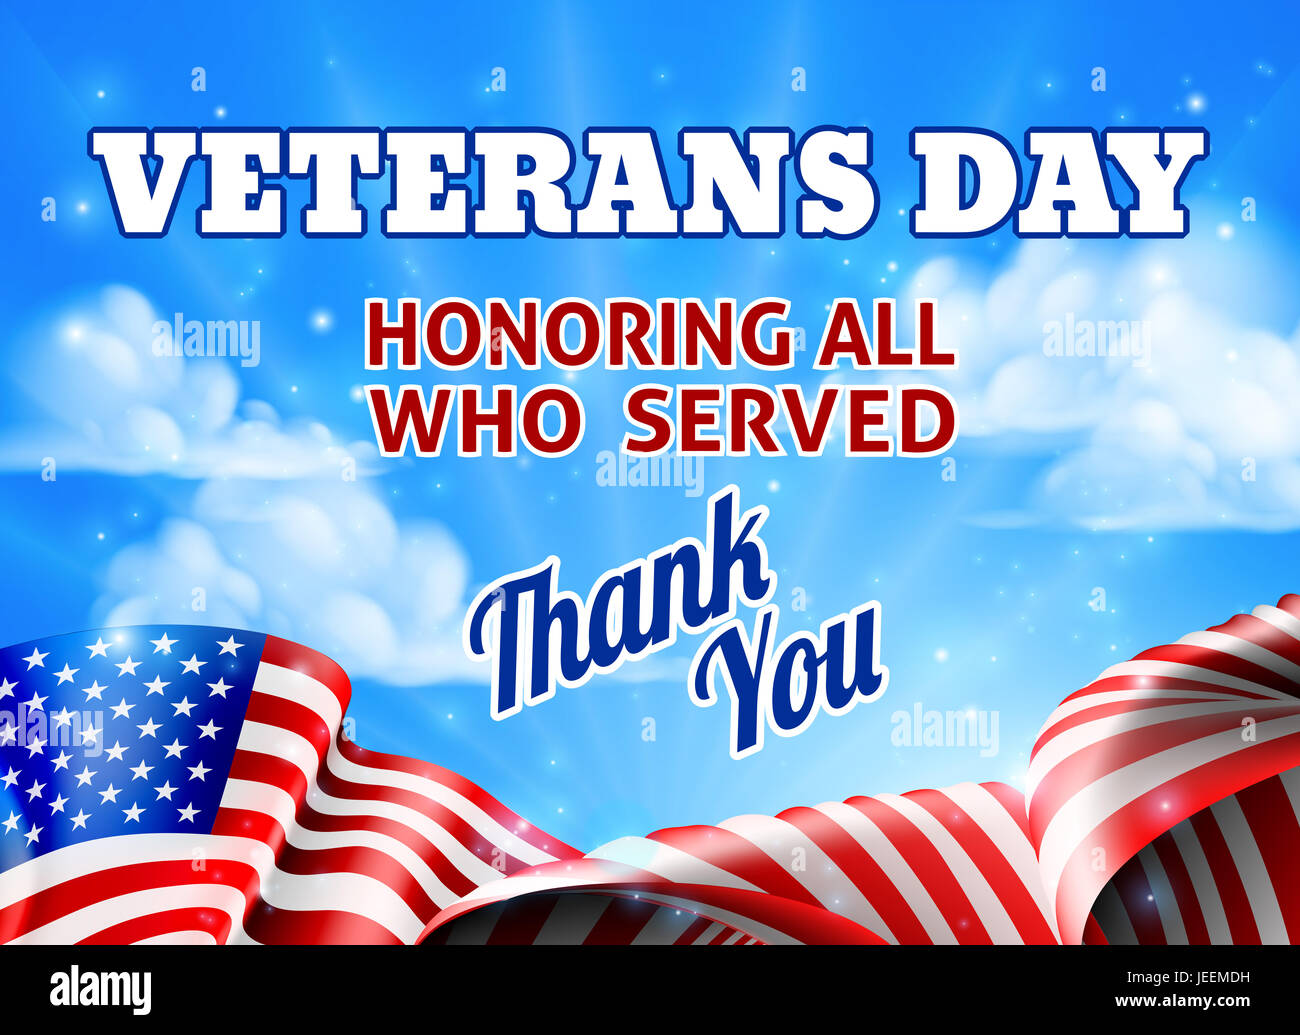 A Veterans Day sky background with an American Flag and Thank You message Stock Photo